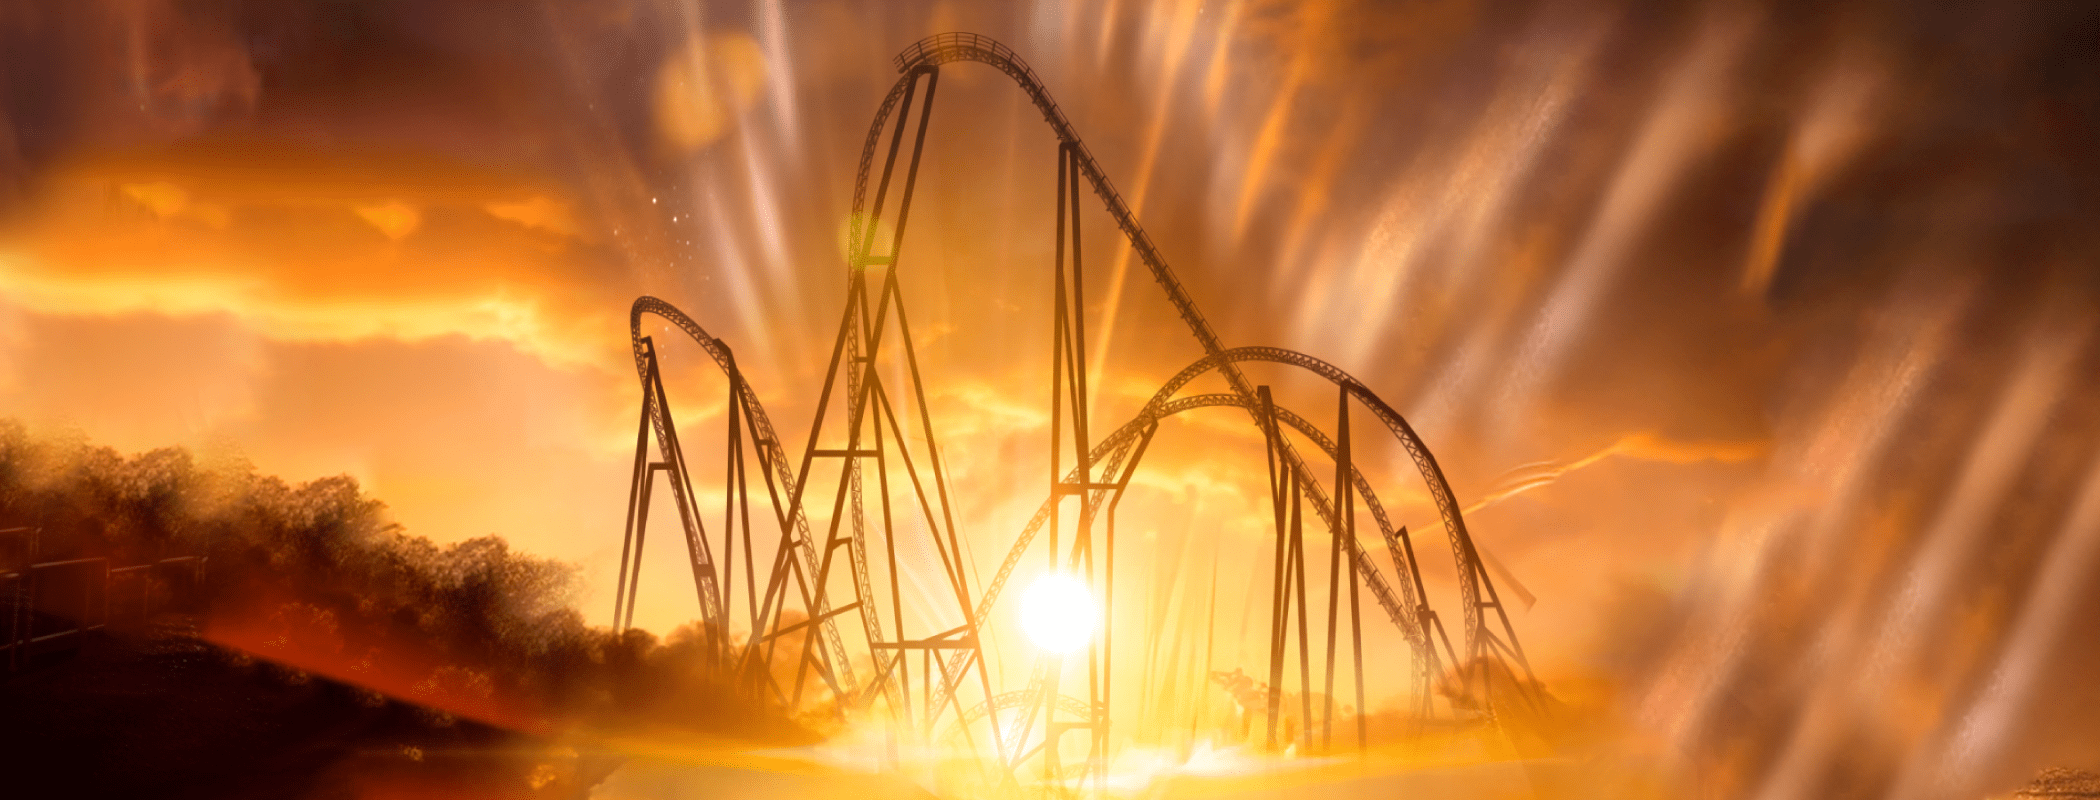 What is best theme park in London for thrilling rides? - Quora